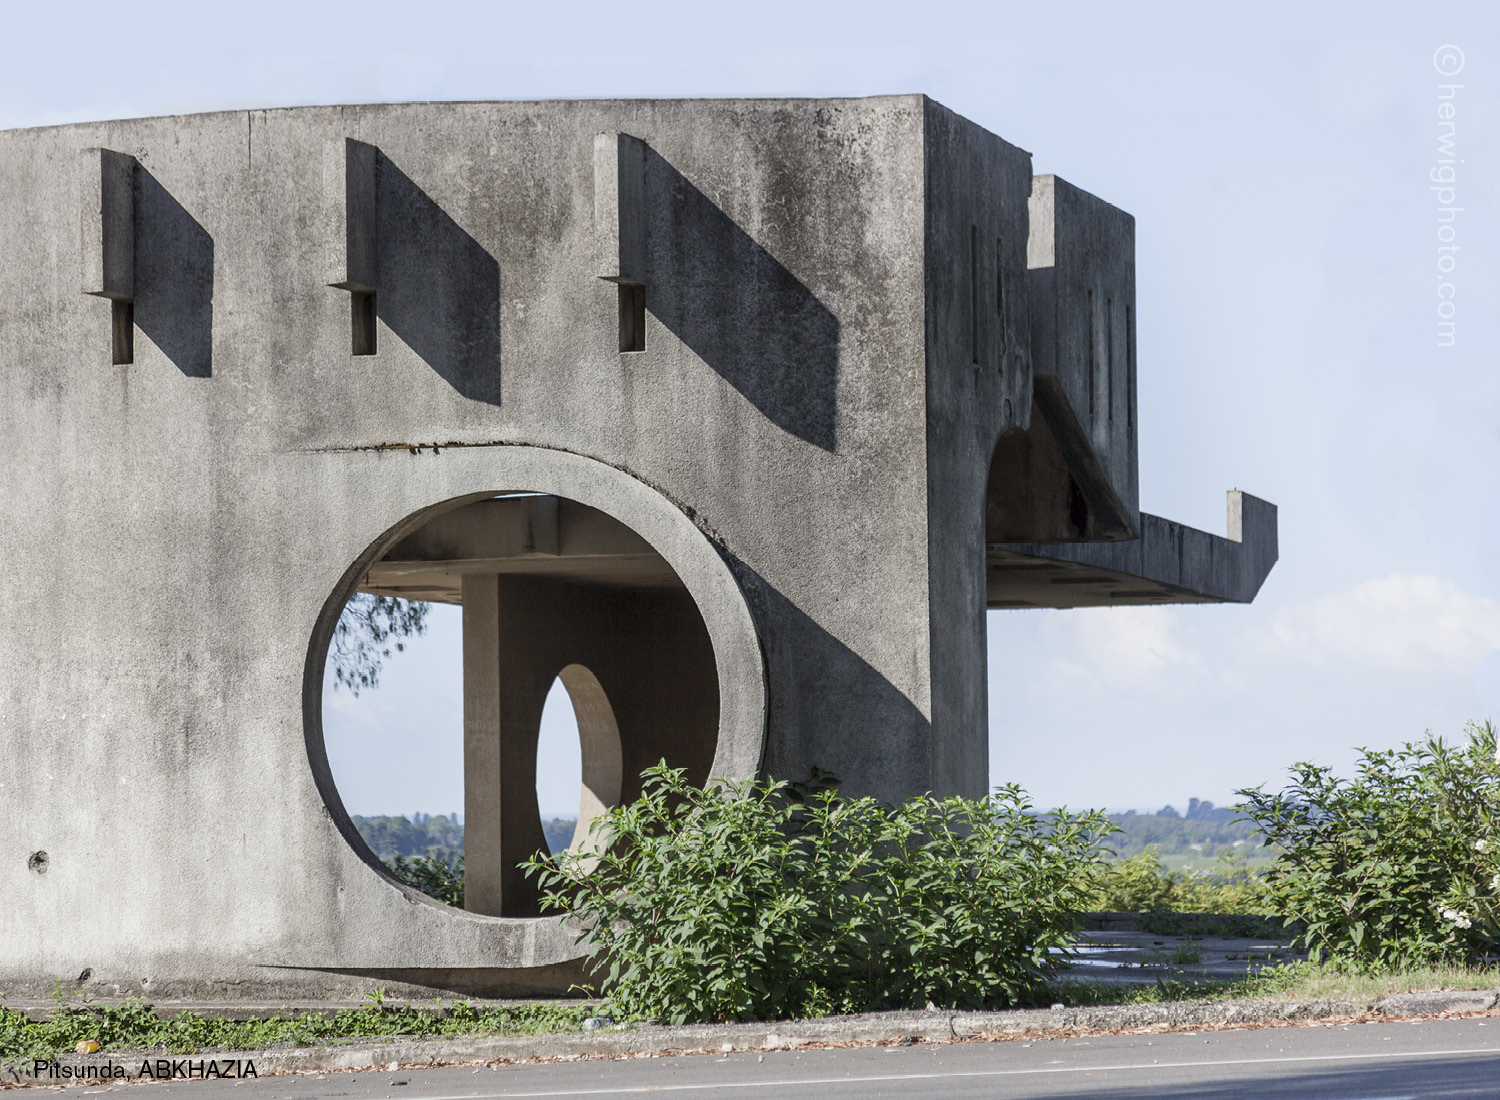 These Bus Stops Left Over From The Soviet Union Are Wonderfully Bizarre